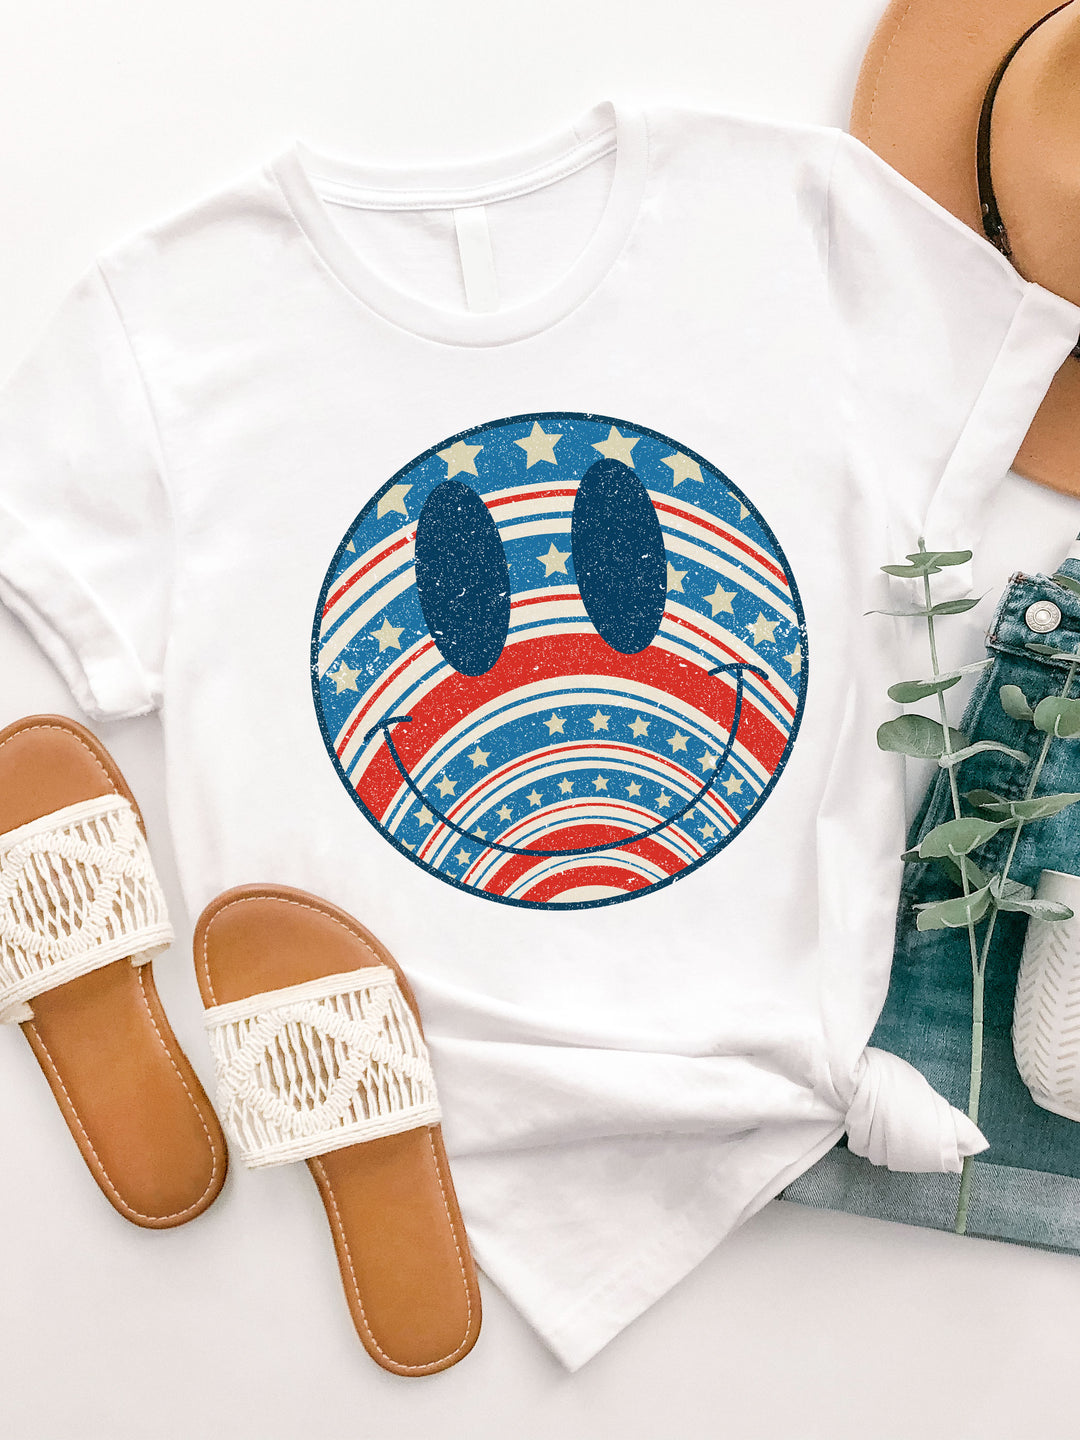 Star Stripes Smiley Face Graphic Tee